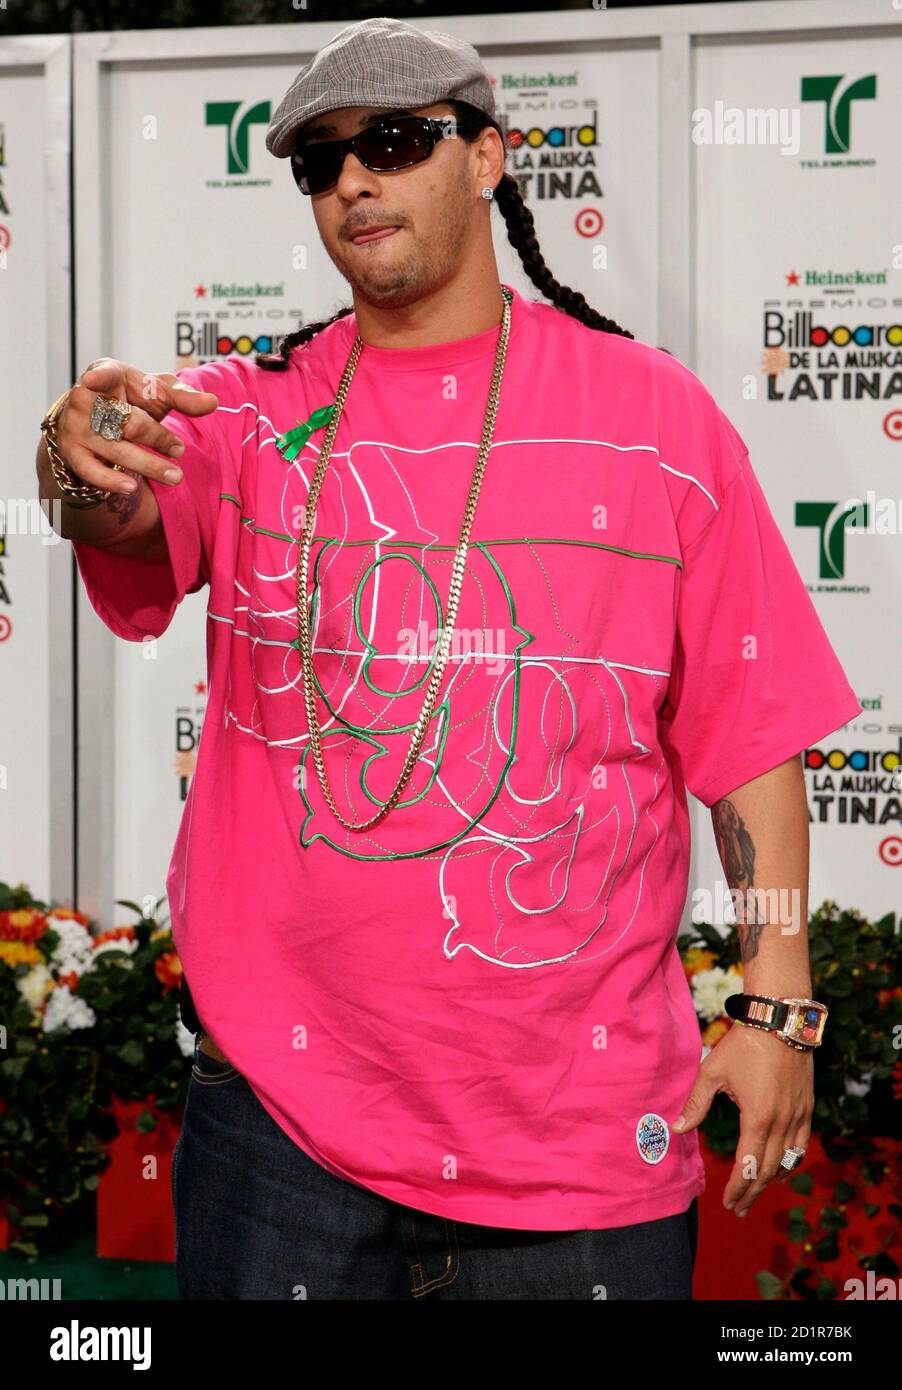 Don Dinero of the U.S. arrives at the 2007 Billboard Latin Music Awards in Coral Gables, Florida, April 26, 2007.     REUTERS/Marc Serota (UNITED STATES) Stock Photo